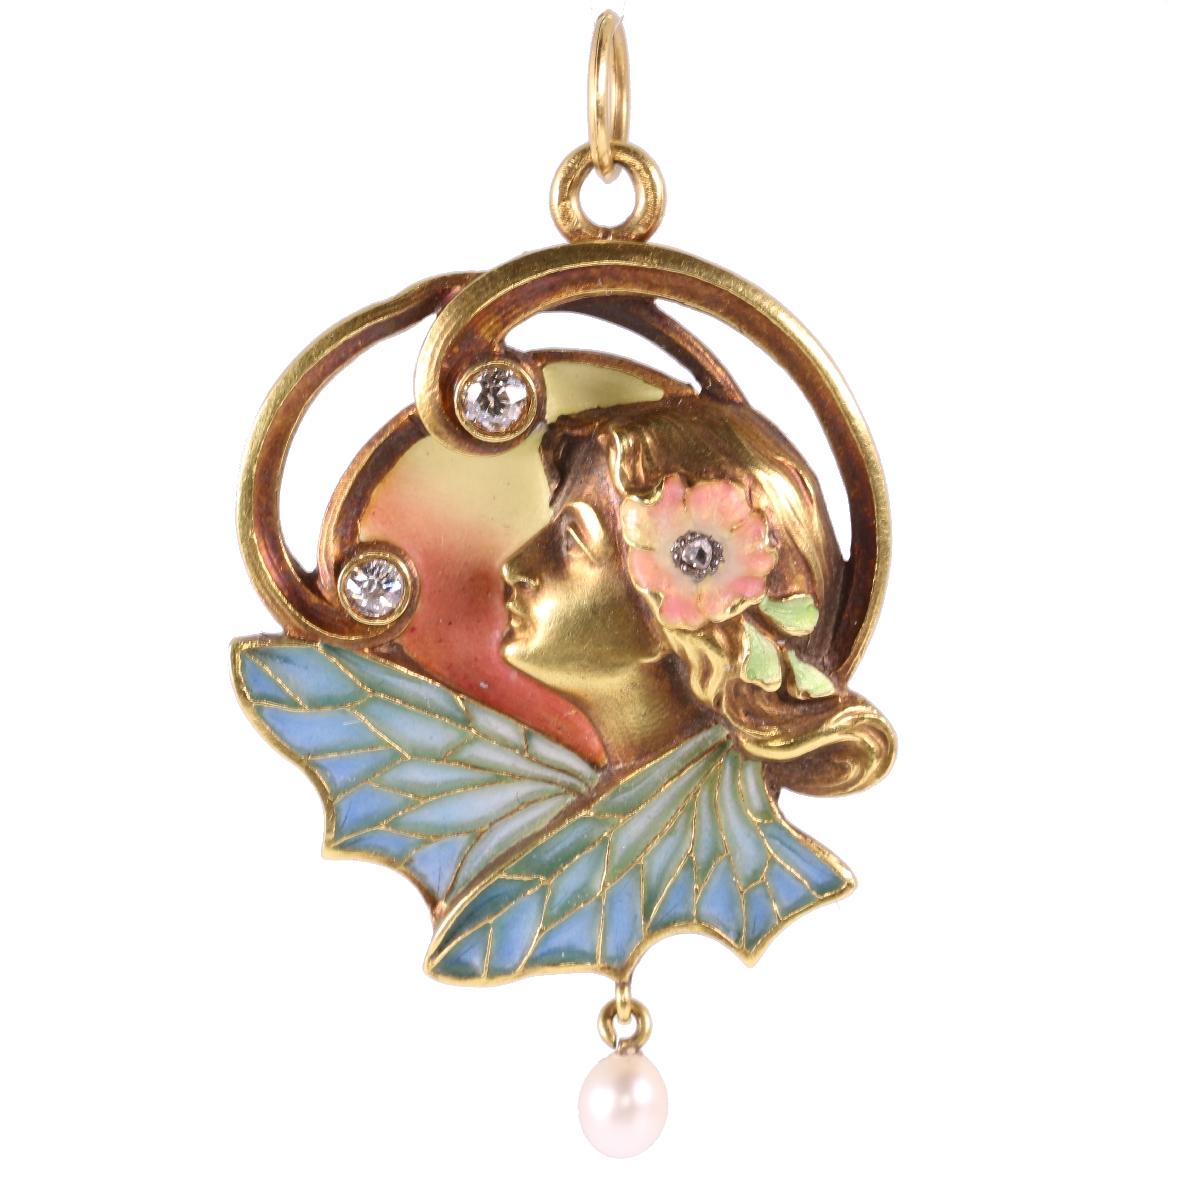 This exceptional 18K rose gold Art Nouveau pendant as well as brooch truly comes to life through the complementary enamelling around the bas-relief chased profile of a nymph. While gazing to the west, this enchanting creature sights two shooting